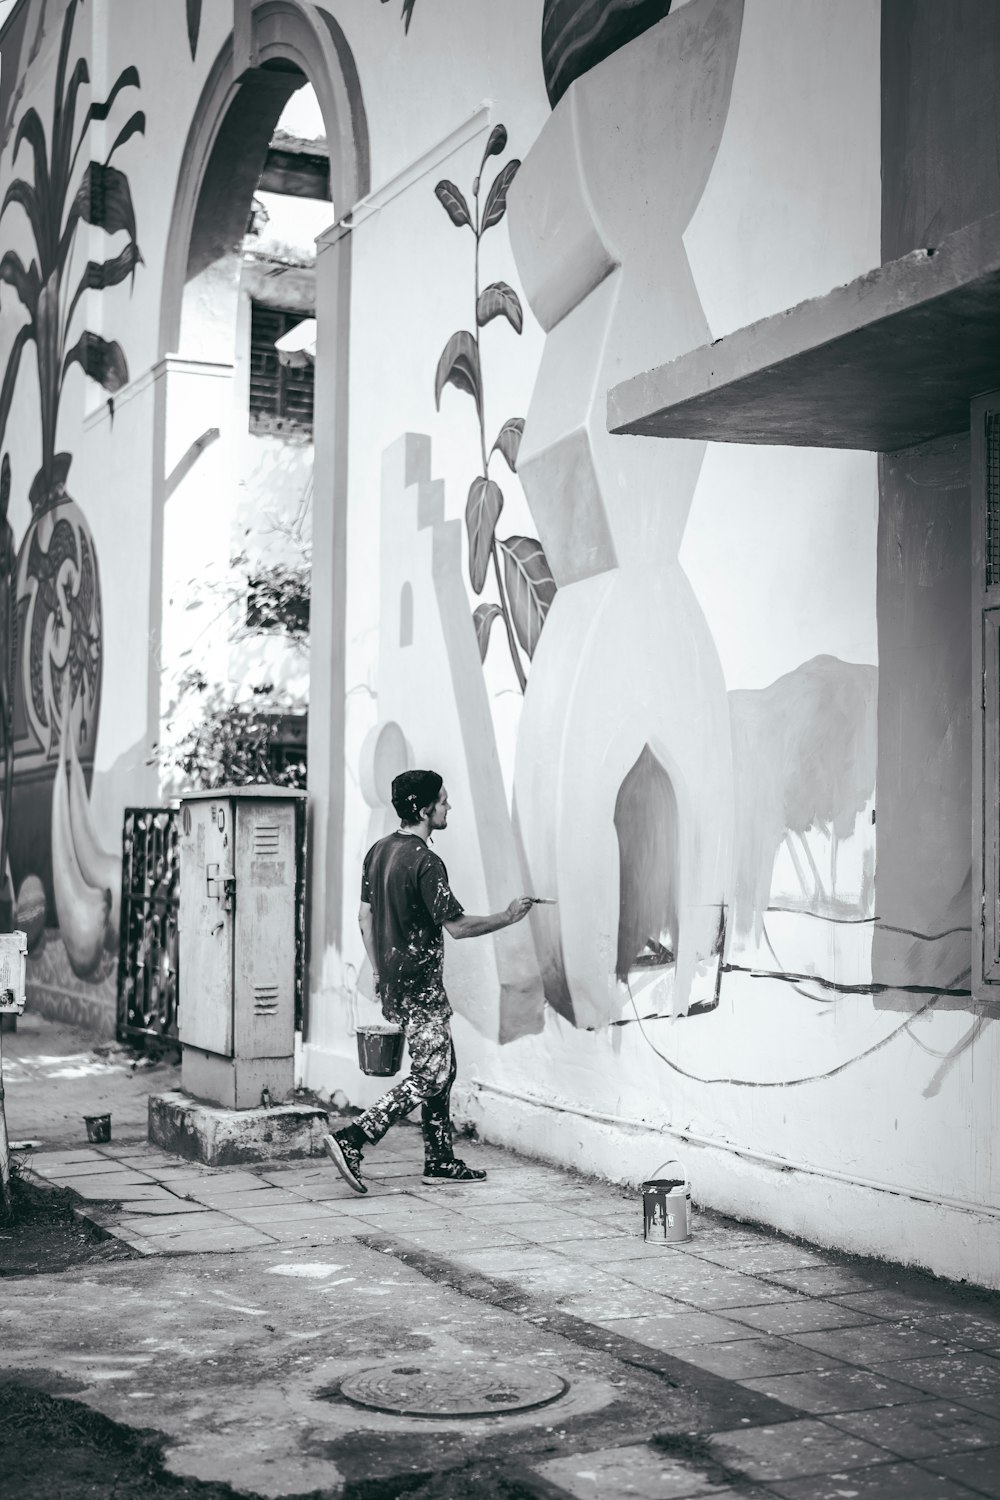 greyscale photo of man painting on wall